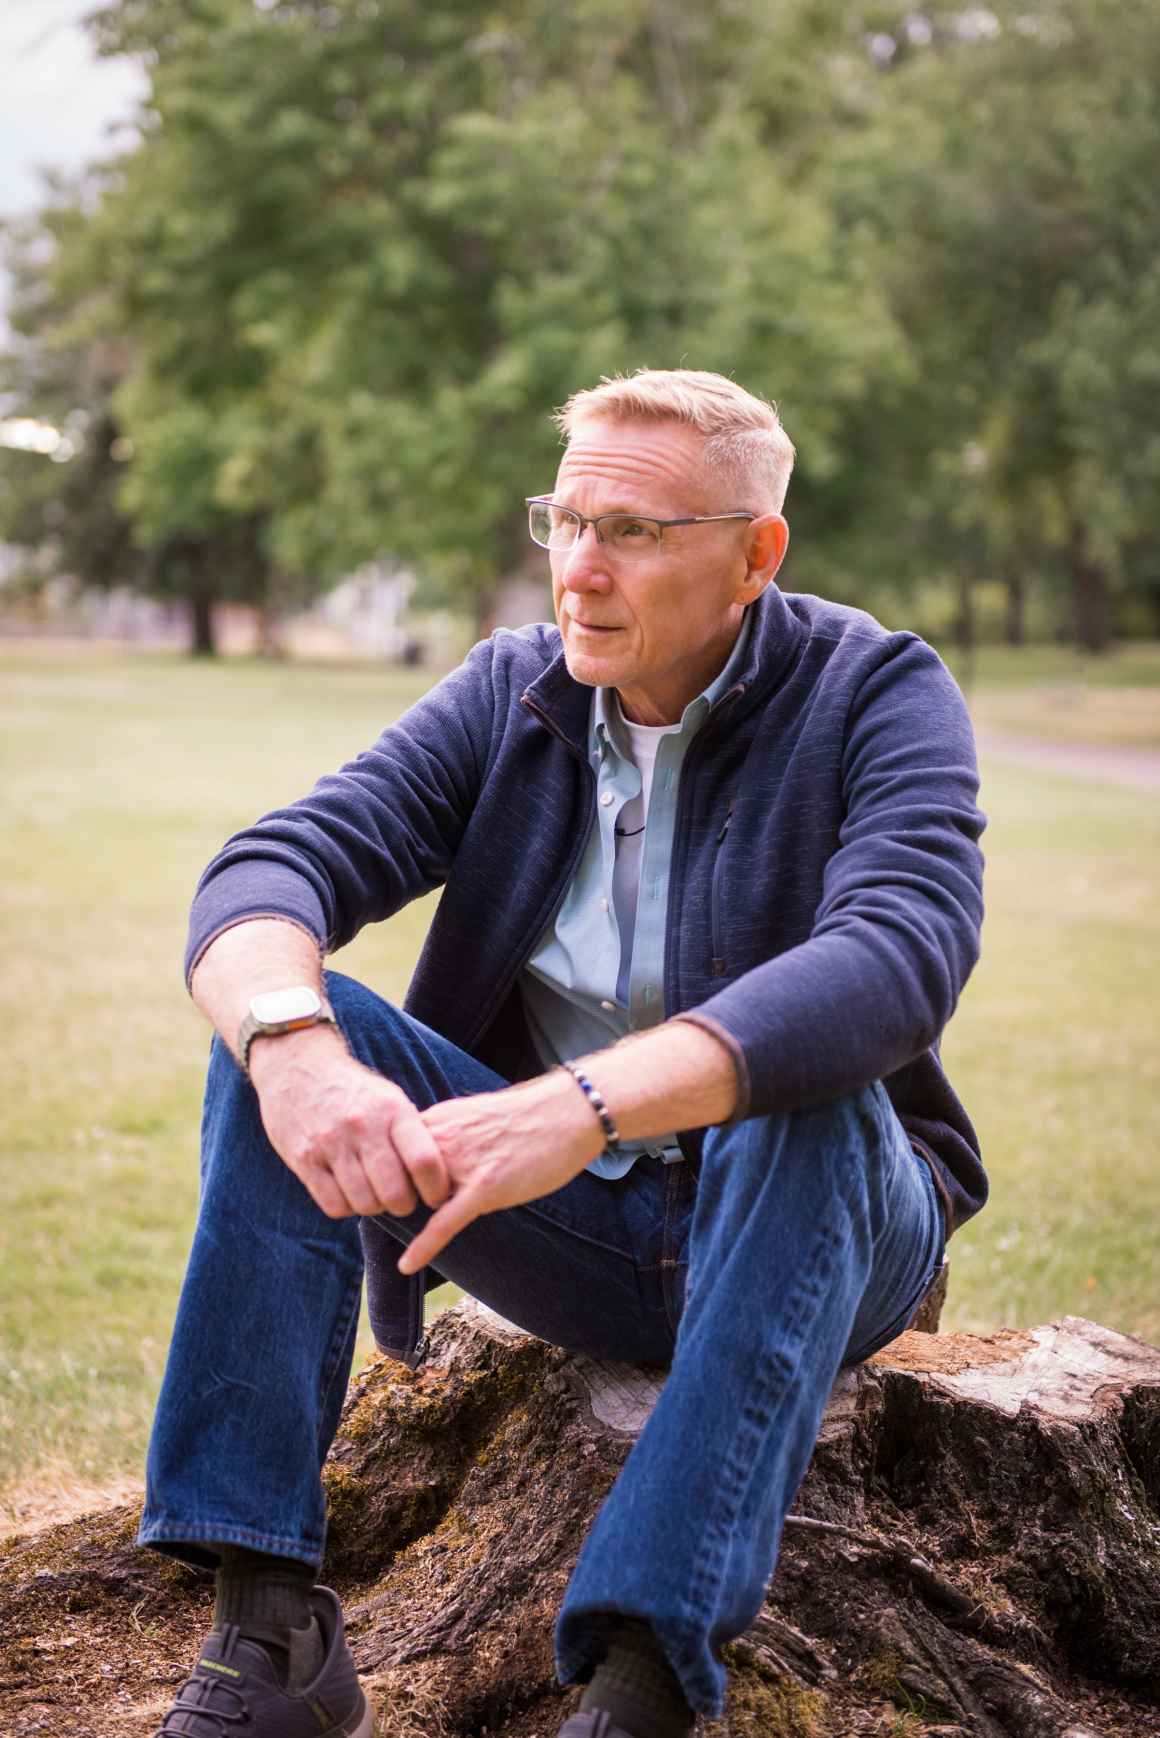 ACLU client, John Cavanaugh, a middle aged white man, sits on a tree stump looking away from camera, wearing glasses, a gray cardigan and jeans.